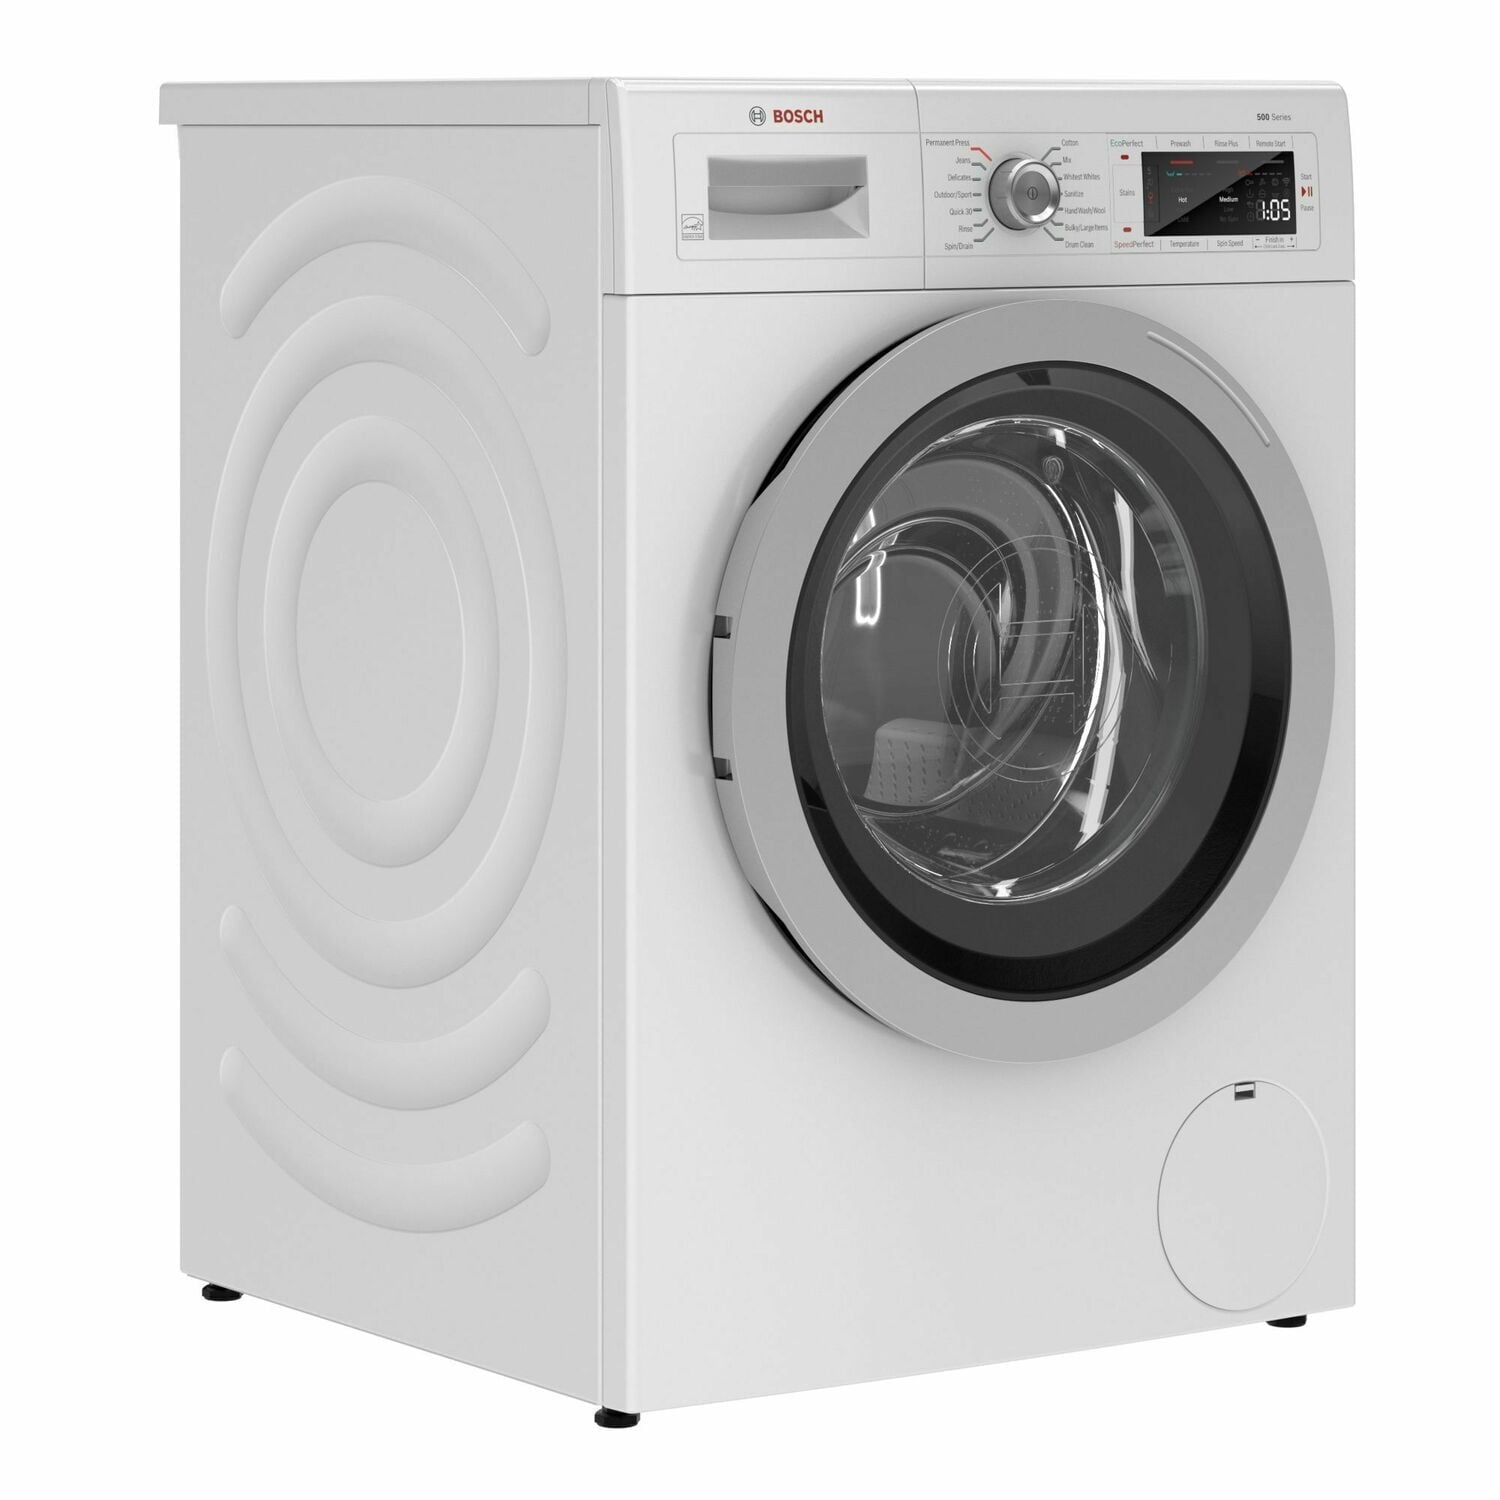 Bosch Compact Washer with Pedestal Drawer White